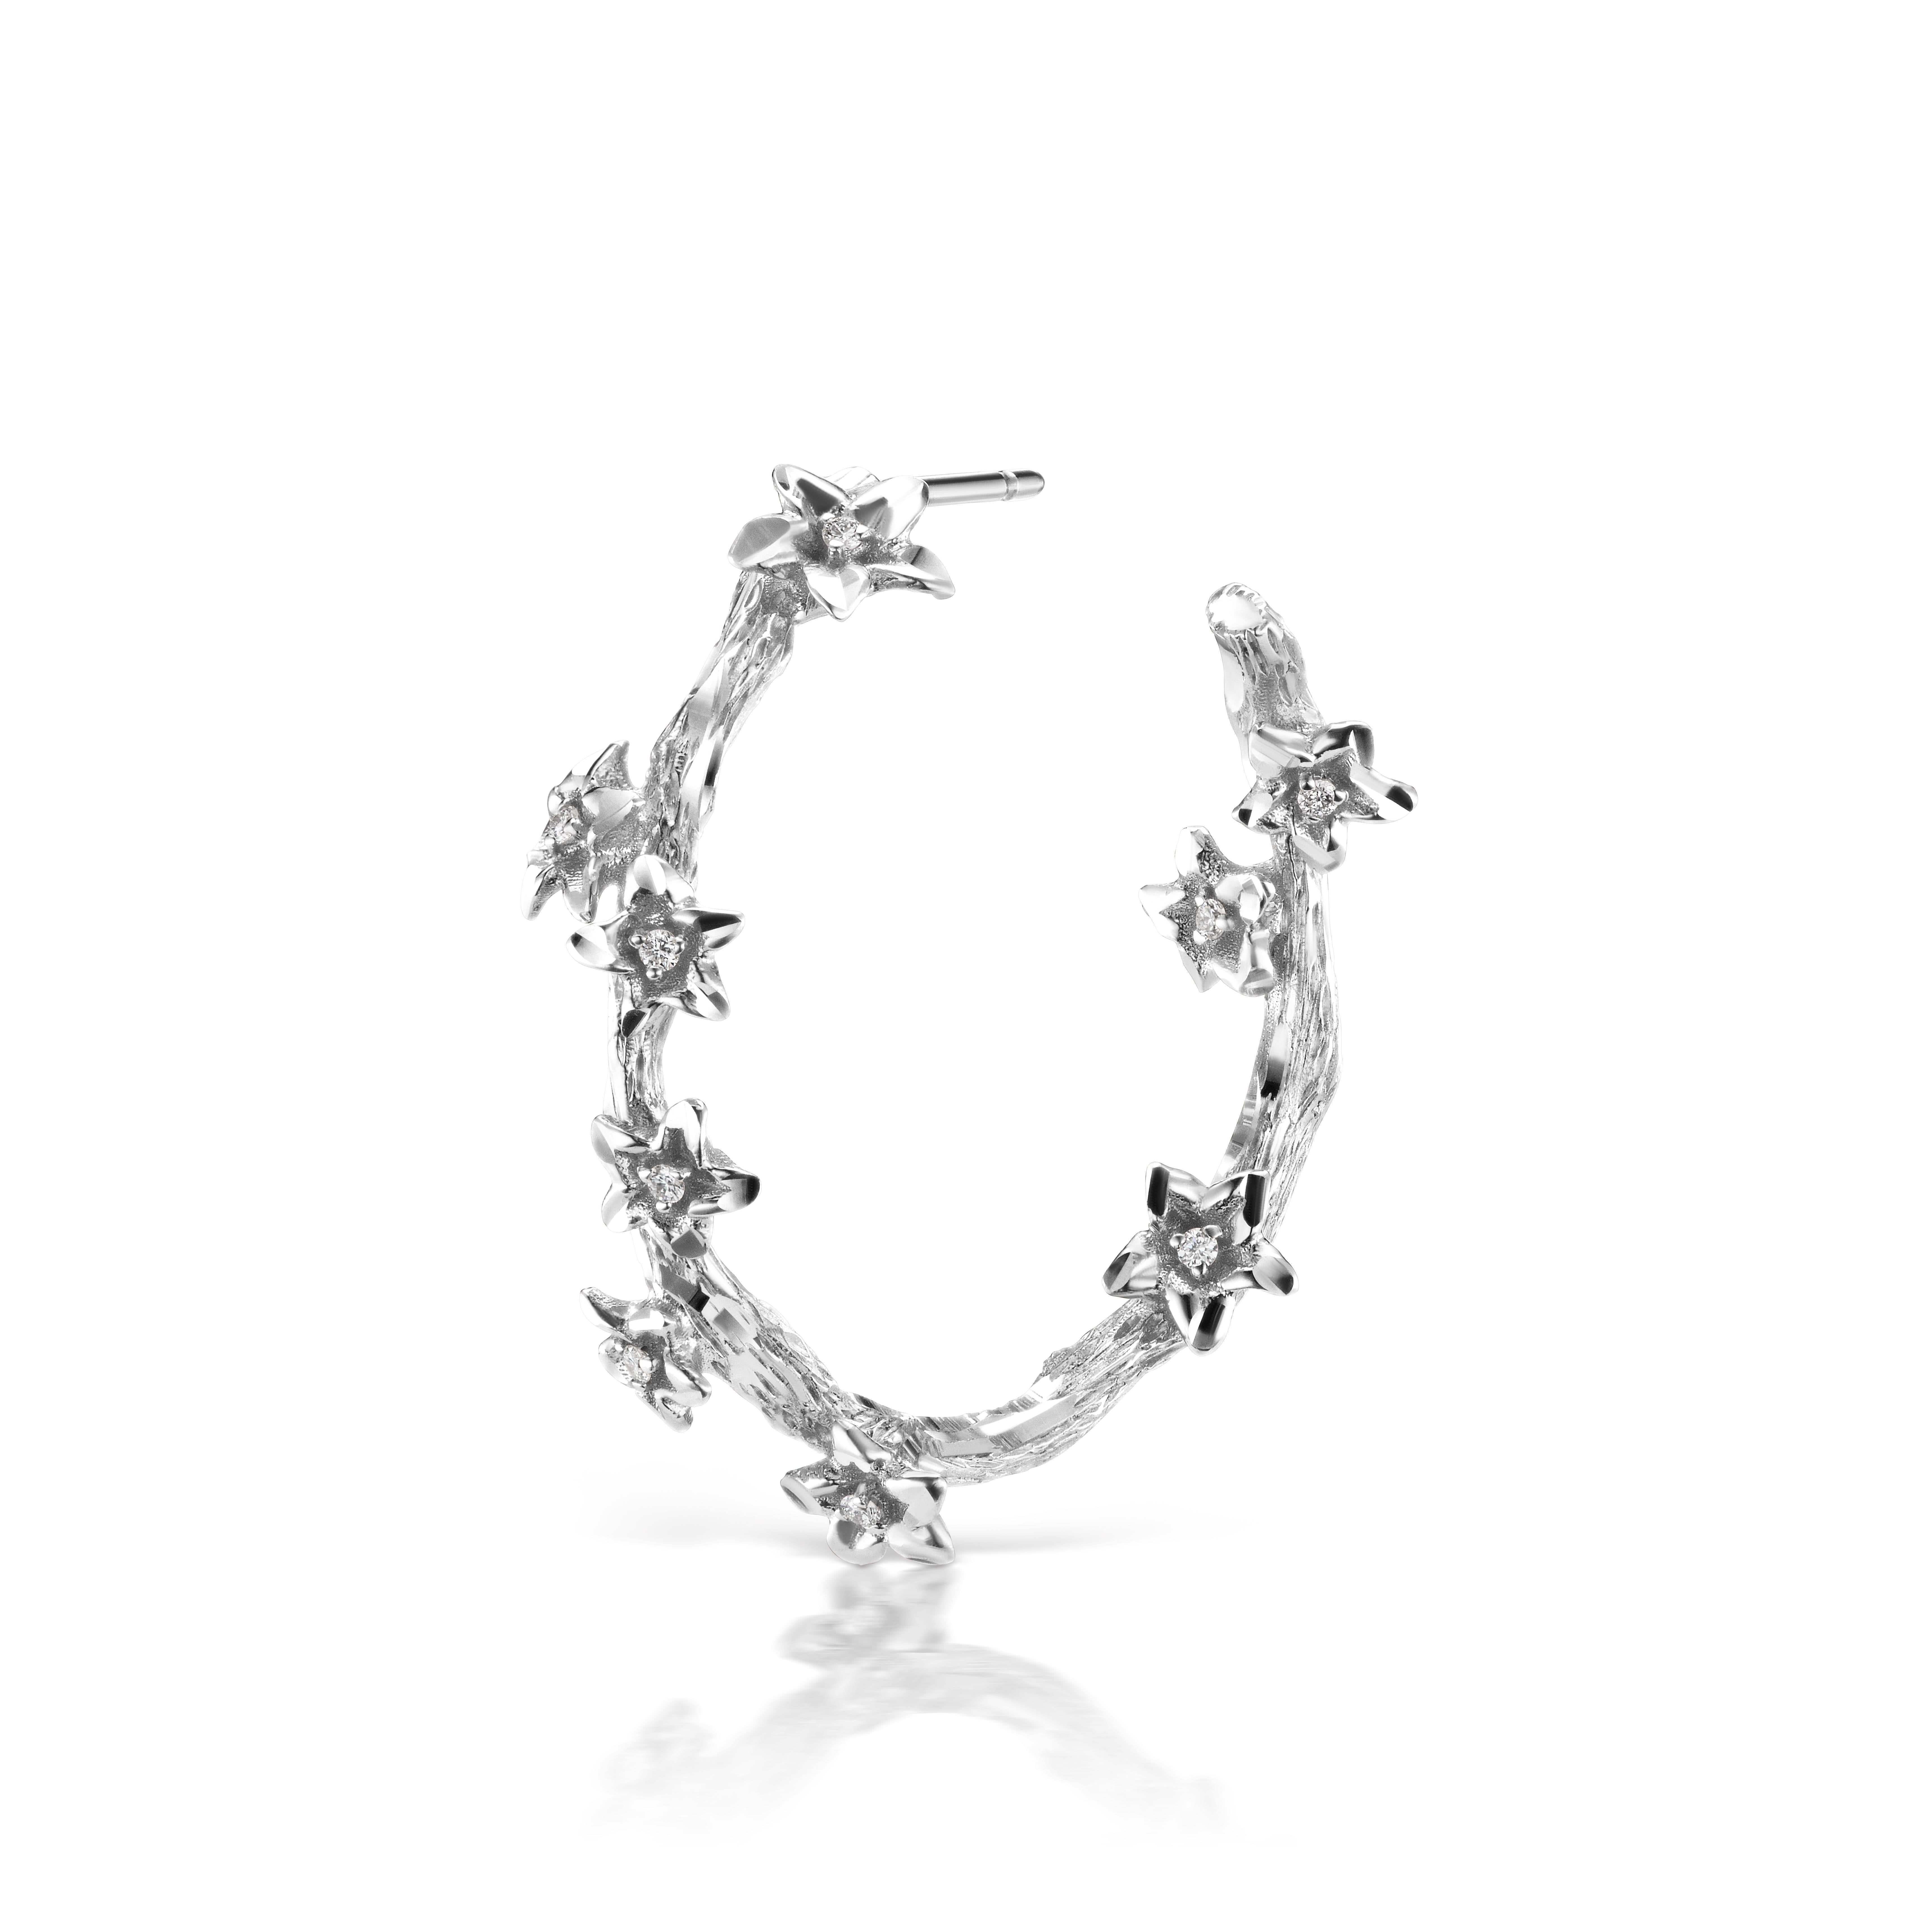 18K White Gold Vine Hoop Earrings with Diamond Accents
0.15ct tw.
1.5